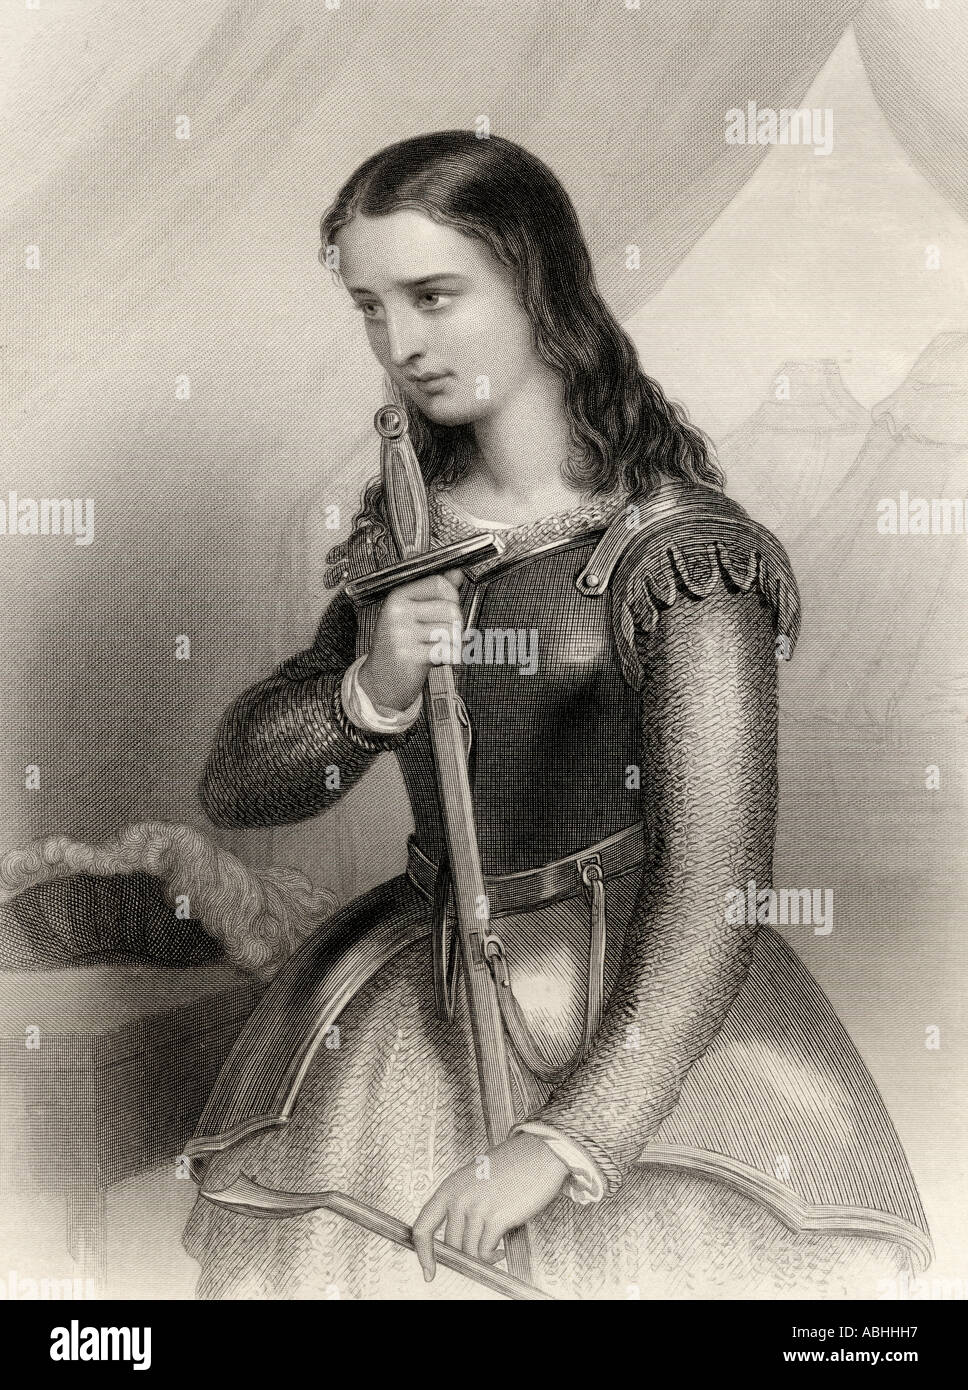 Joan of Arc,1412 -1431. aka Jeanne d'Arc or Jeanne la Pucelle. French heroine and Saint of the Catholic church. Stock Photo